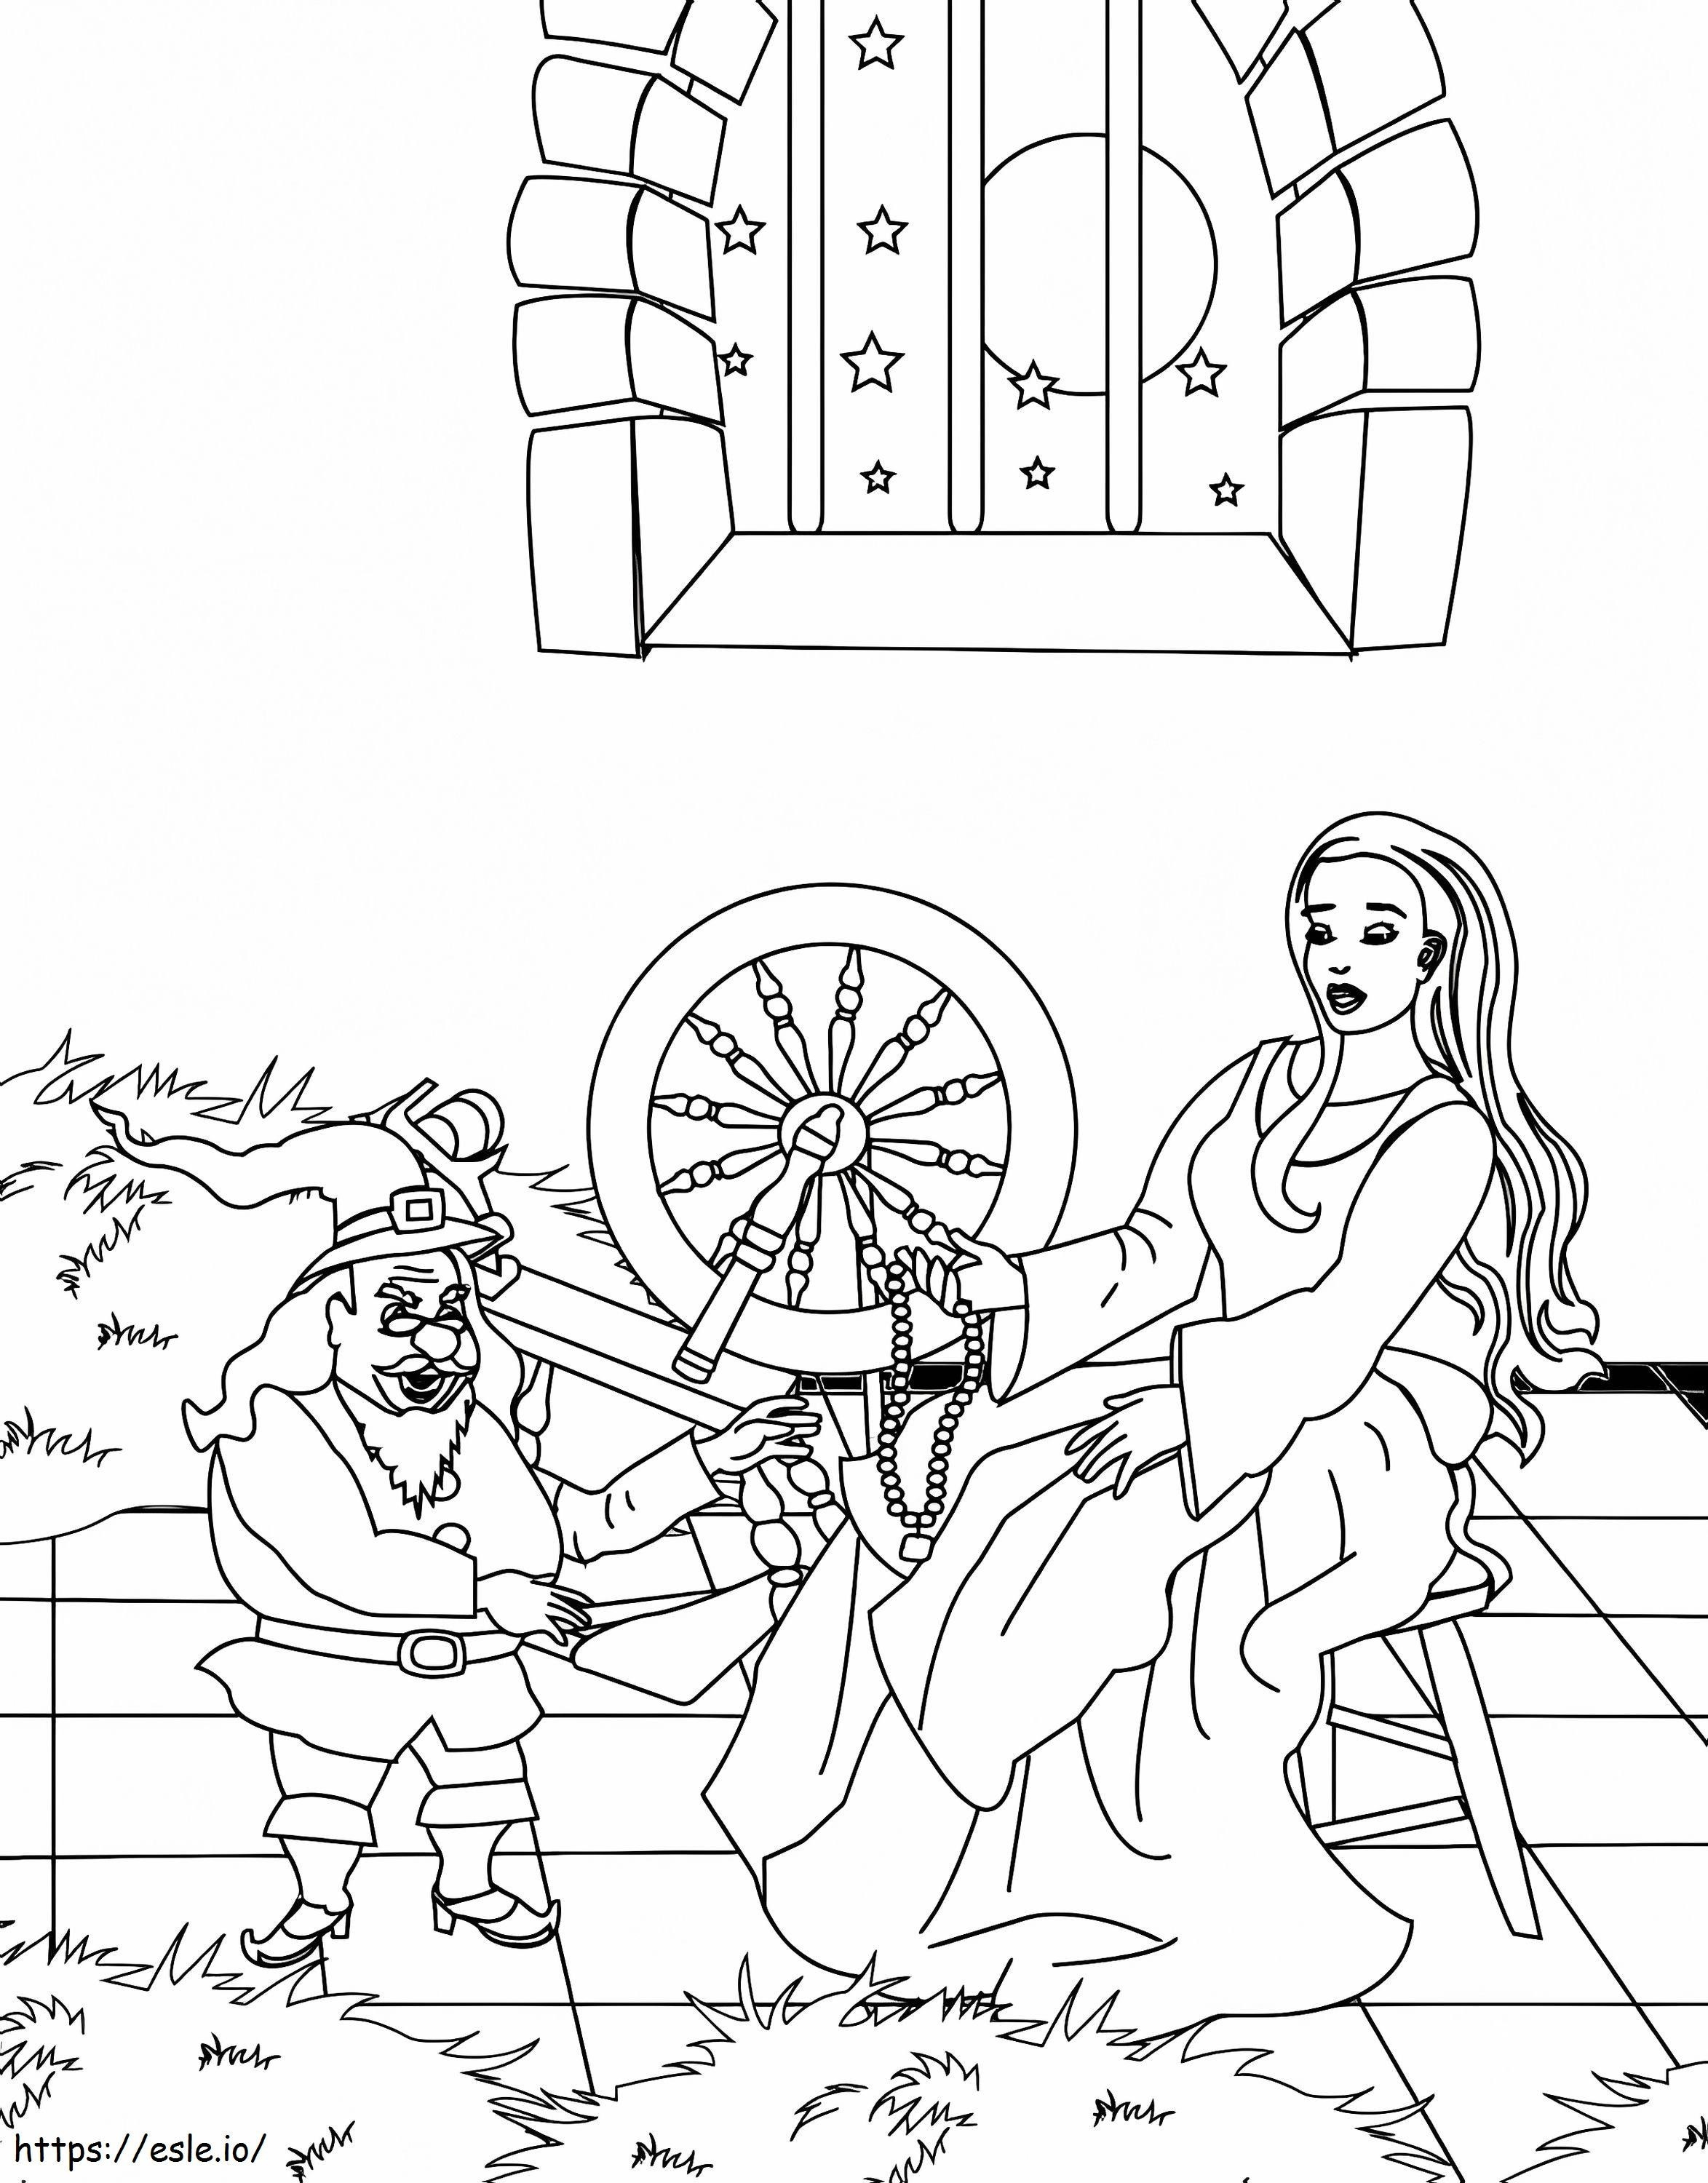 The Miller'S Daughter Giving Her Necklace coloring page